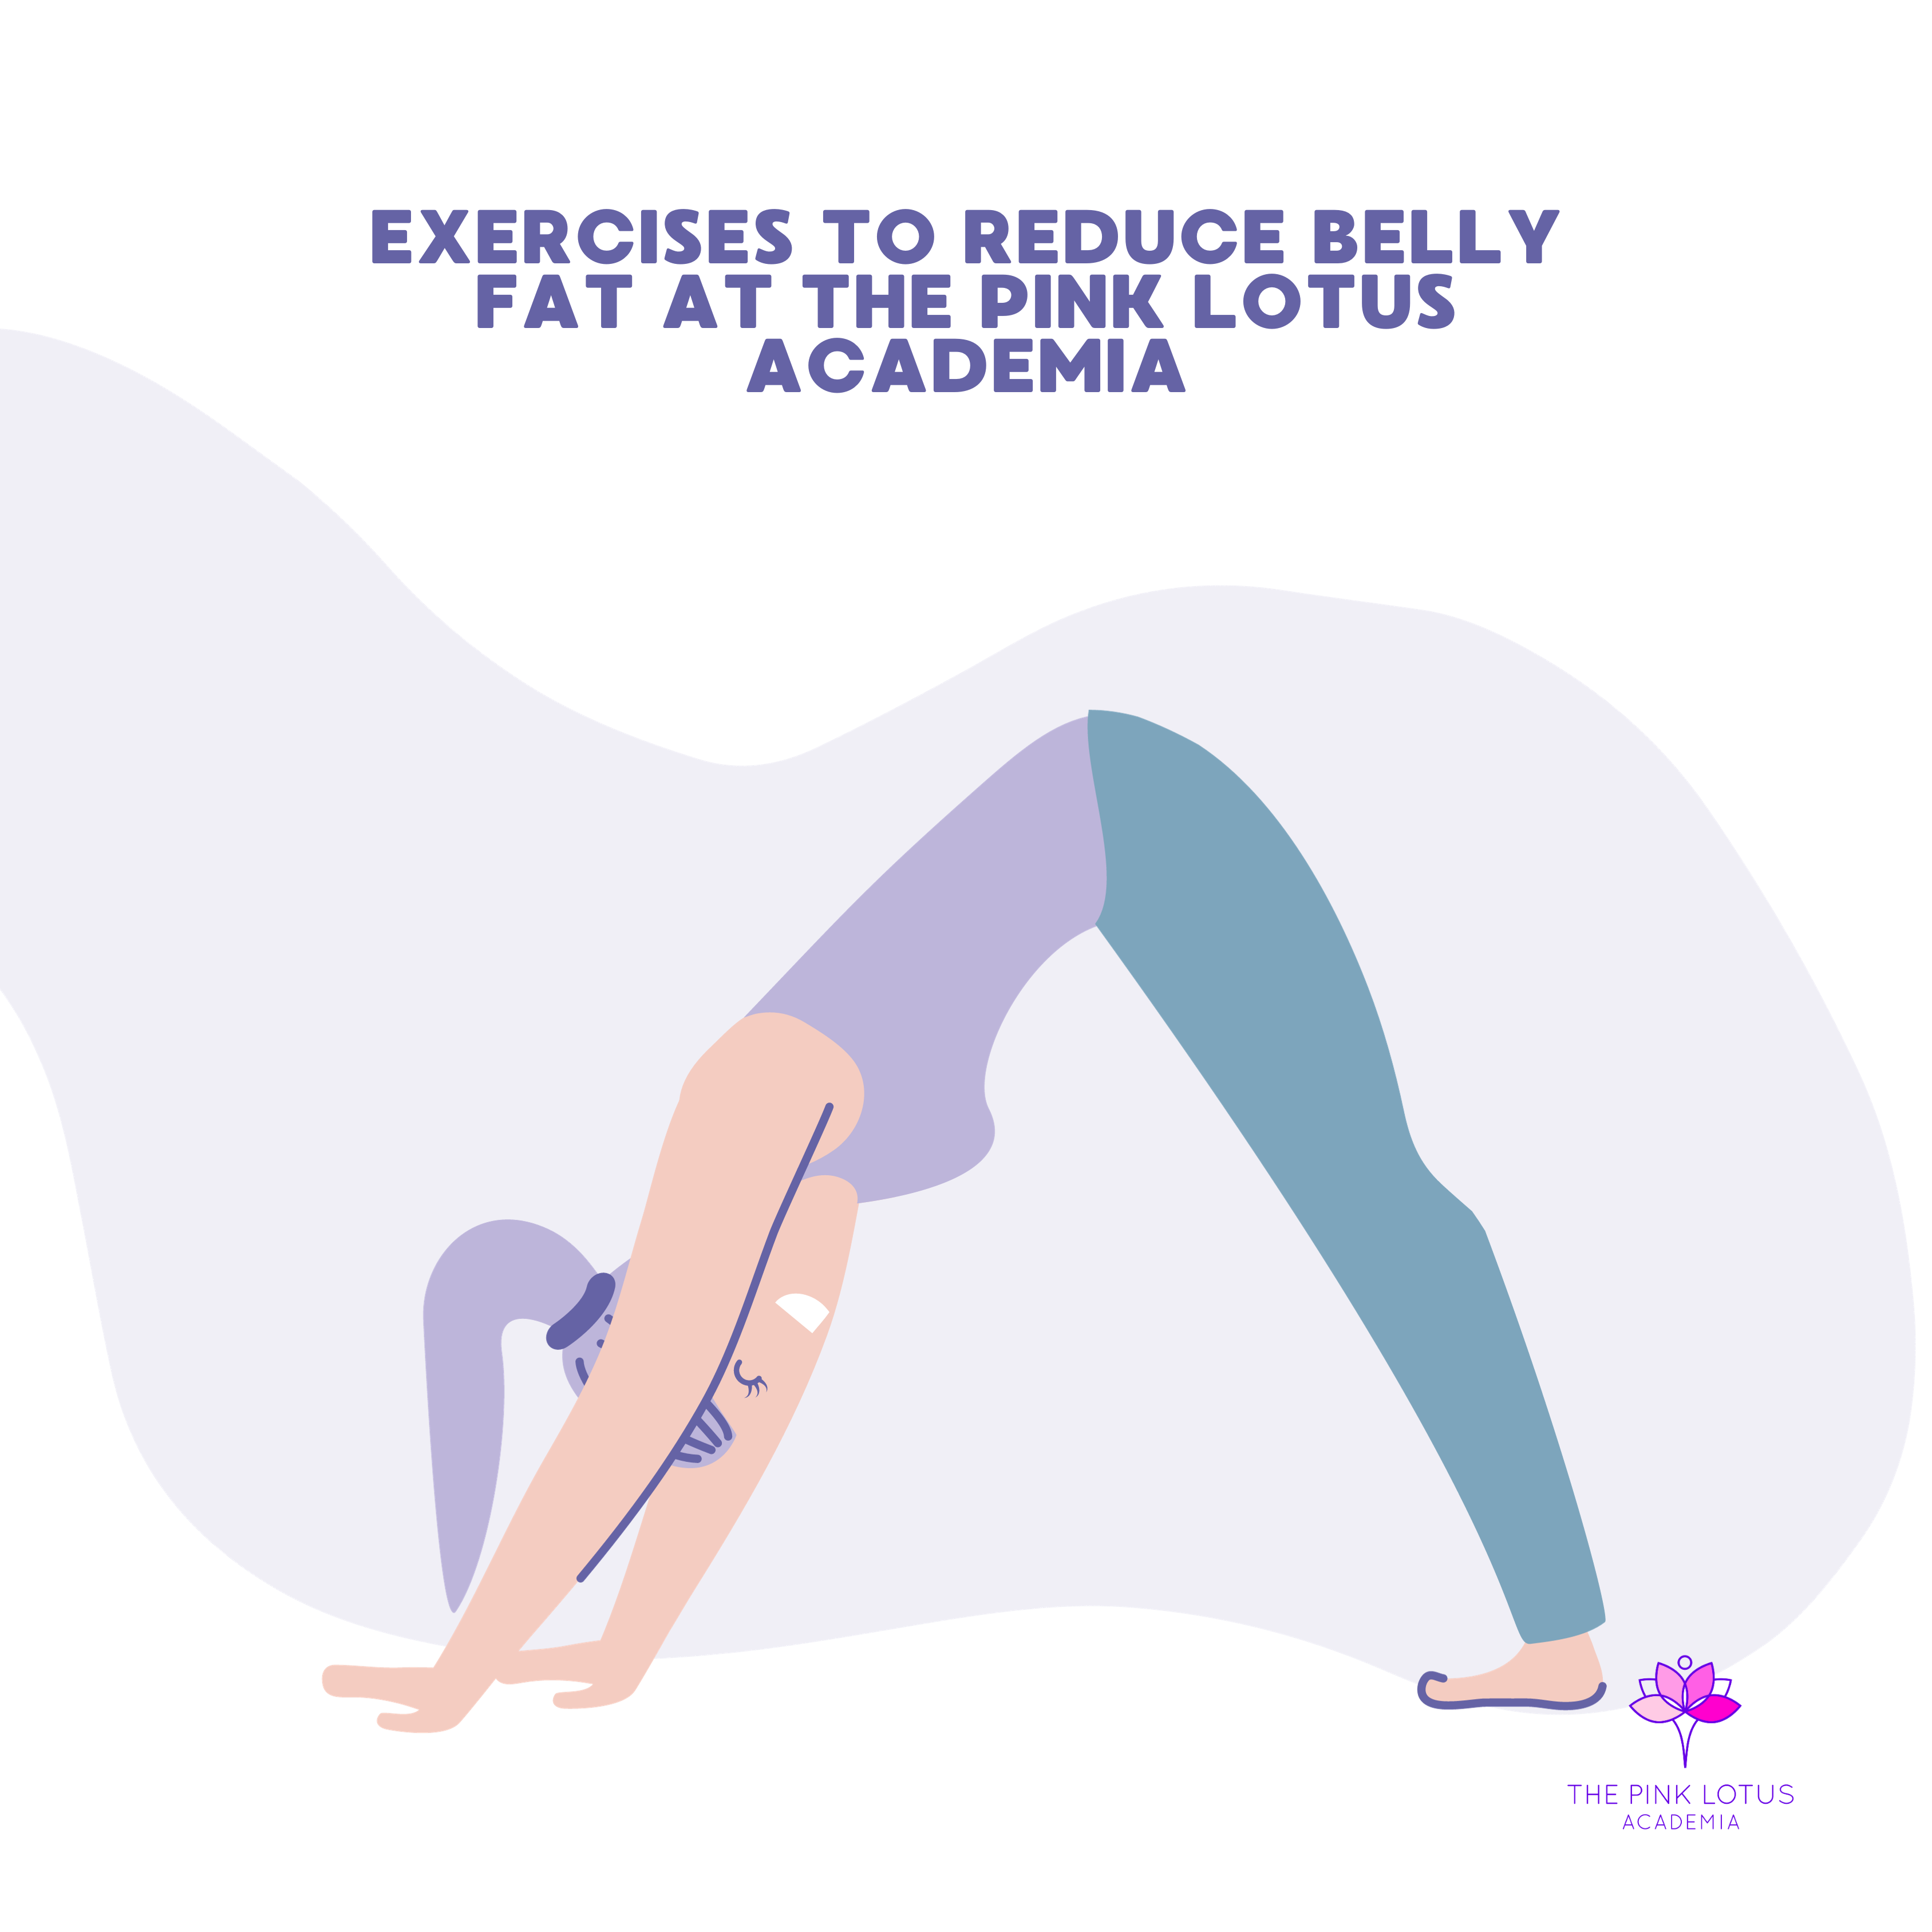 Yoga Poses To Burn Belly Fat